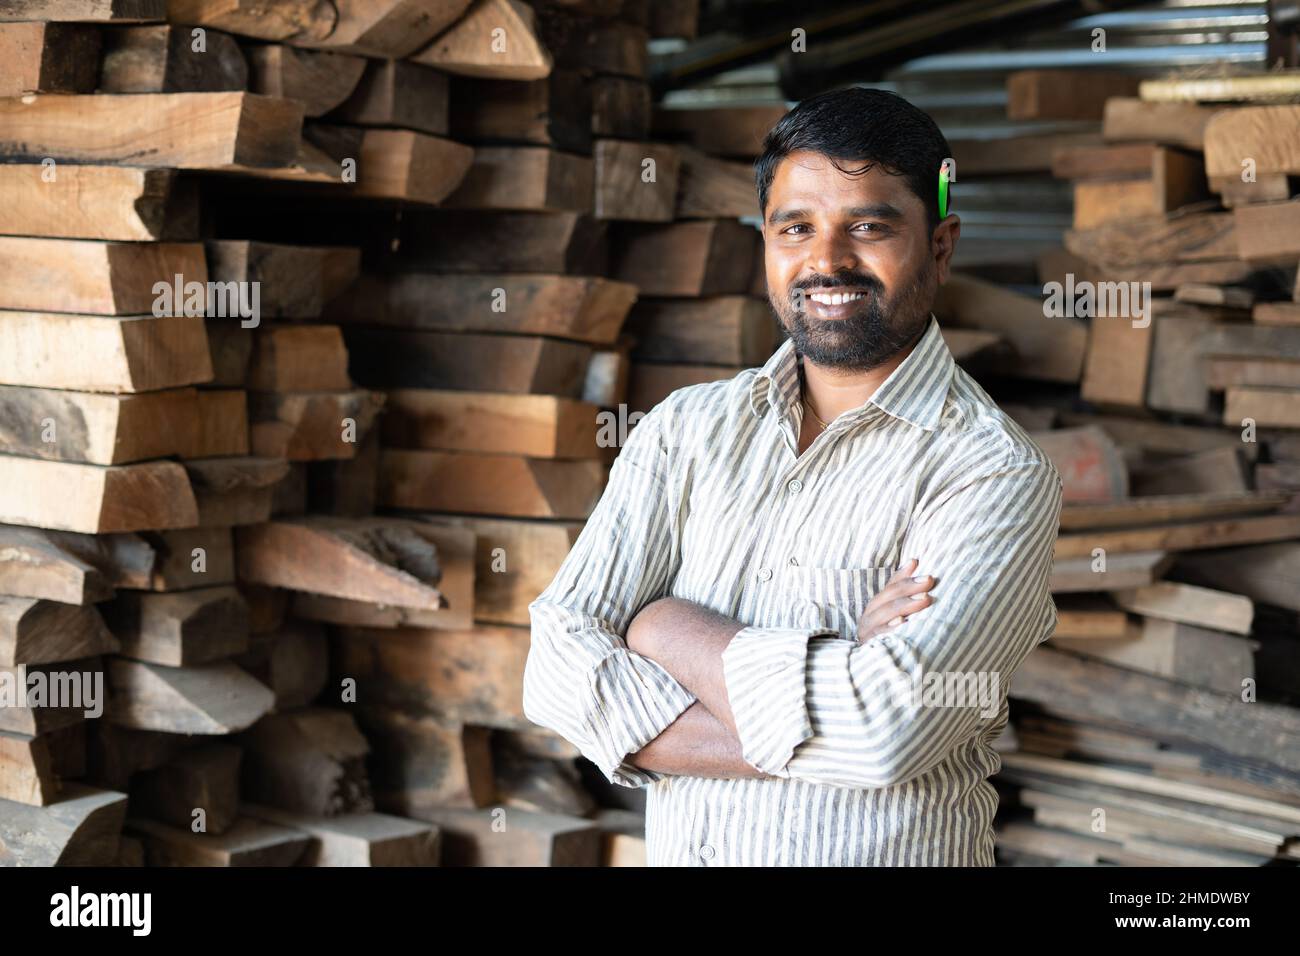 Confident smiling carpenter with arms crossed standing by looking at camera - concept of self confidence, skilled professional occupation and Stock Photo